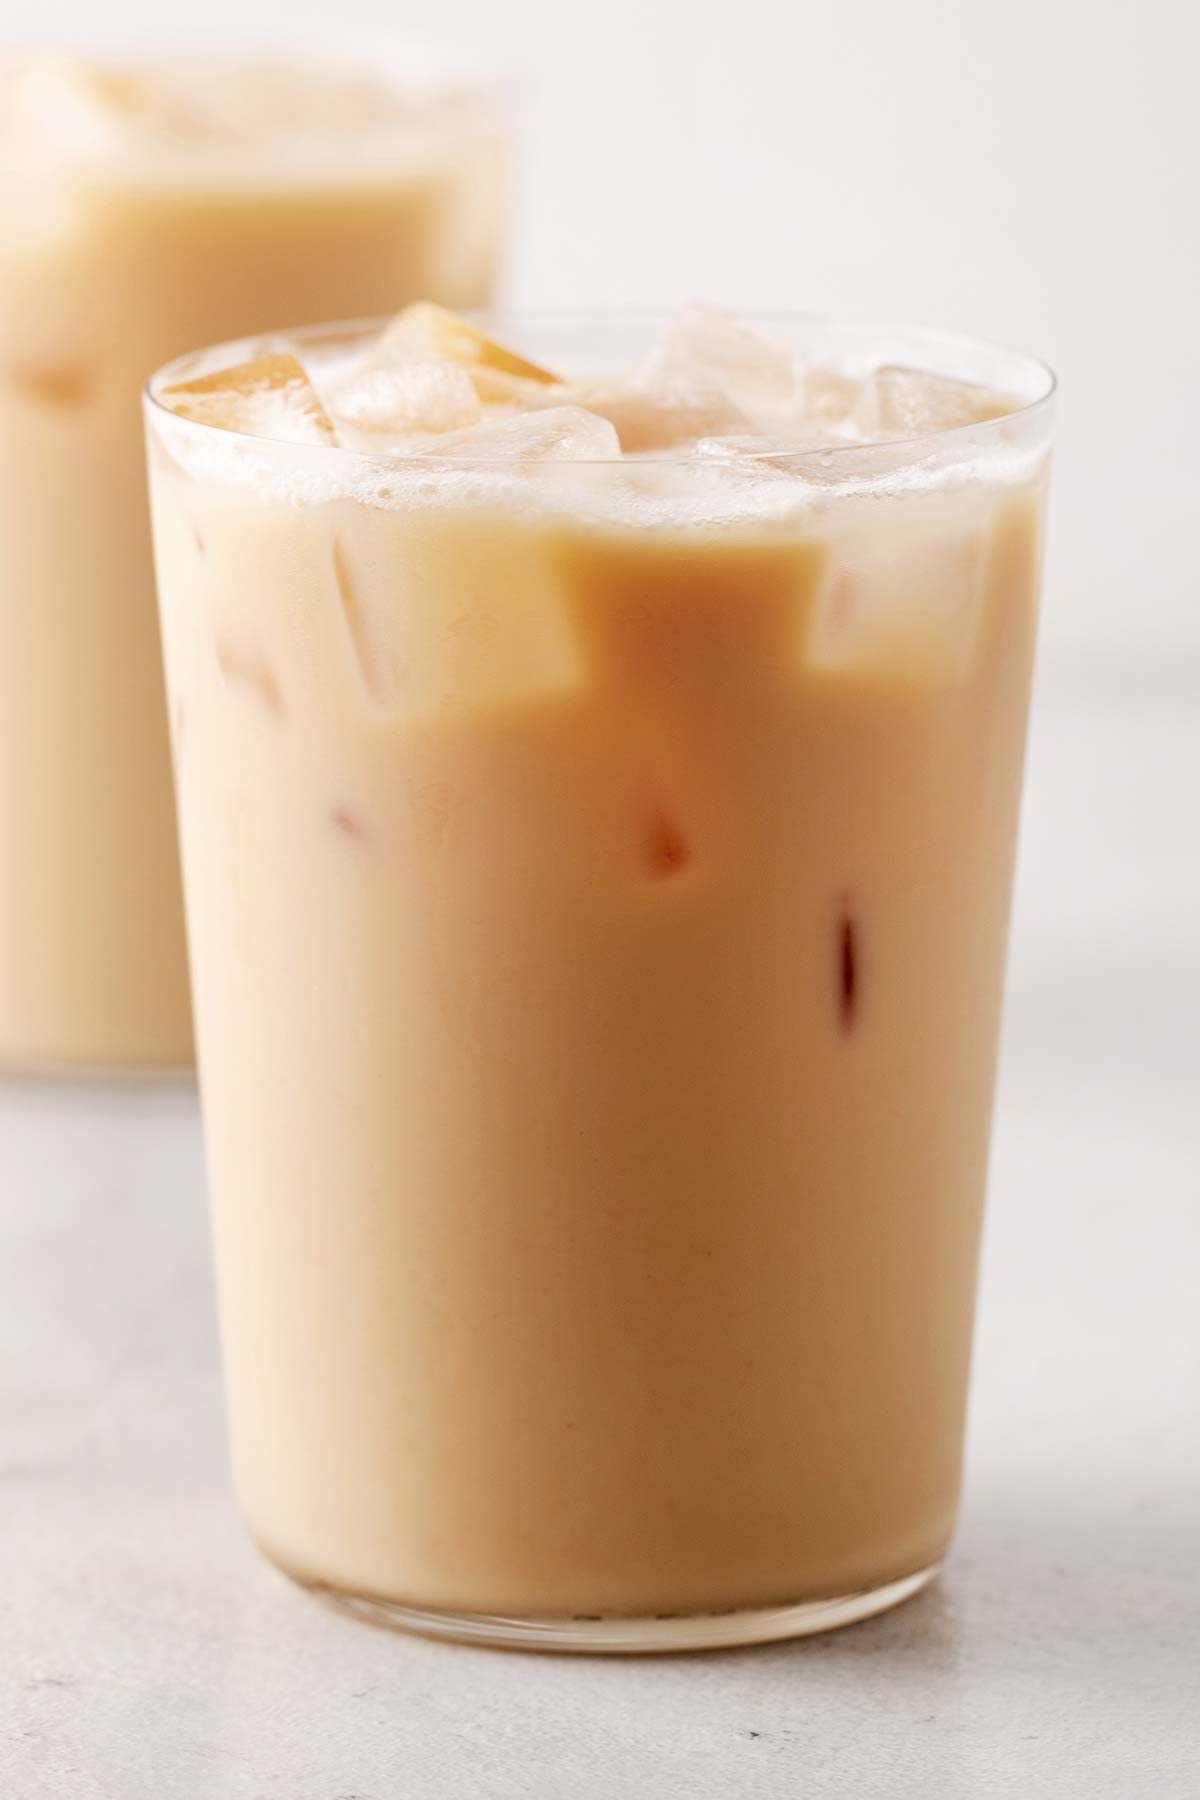 Starbucks Iced London Fog Tea Latte copycat in a clear glass topped with ice.